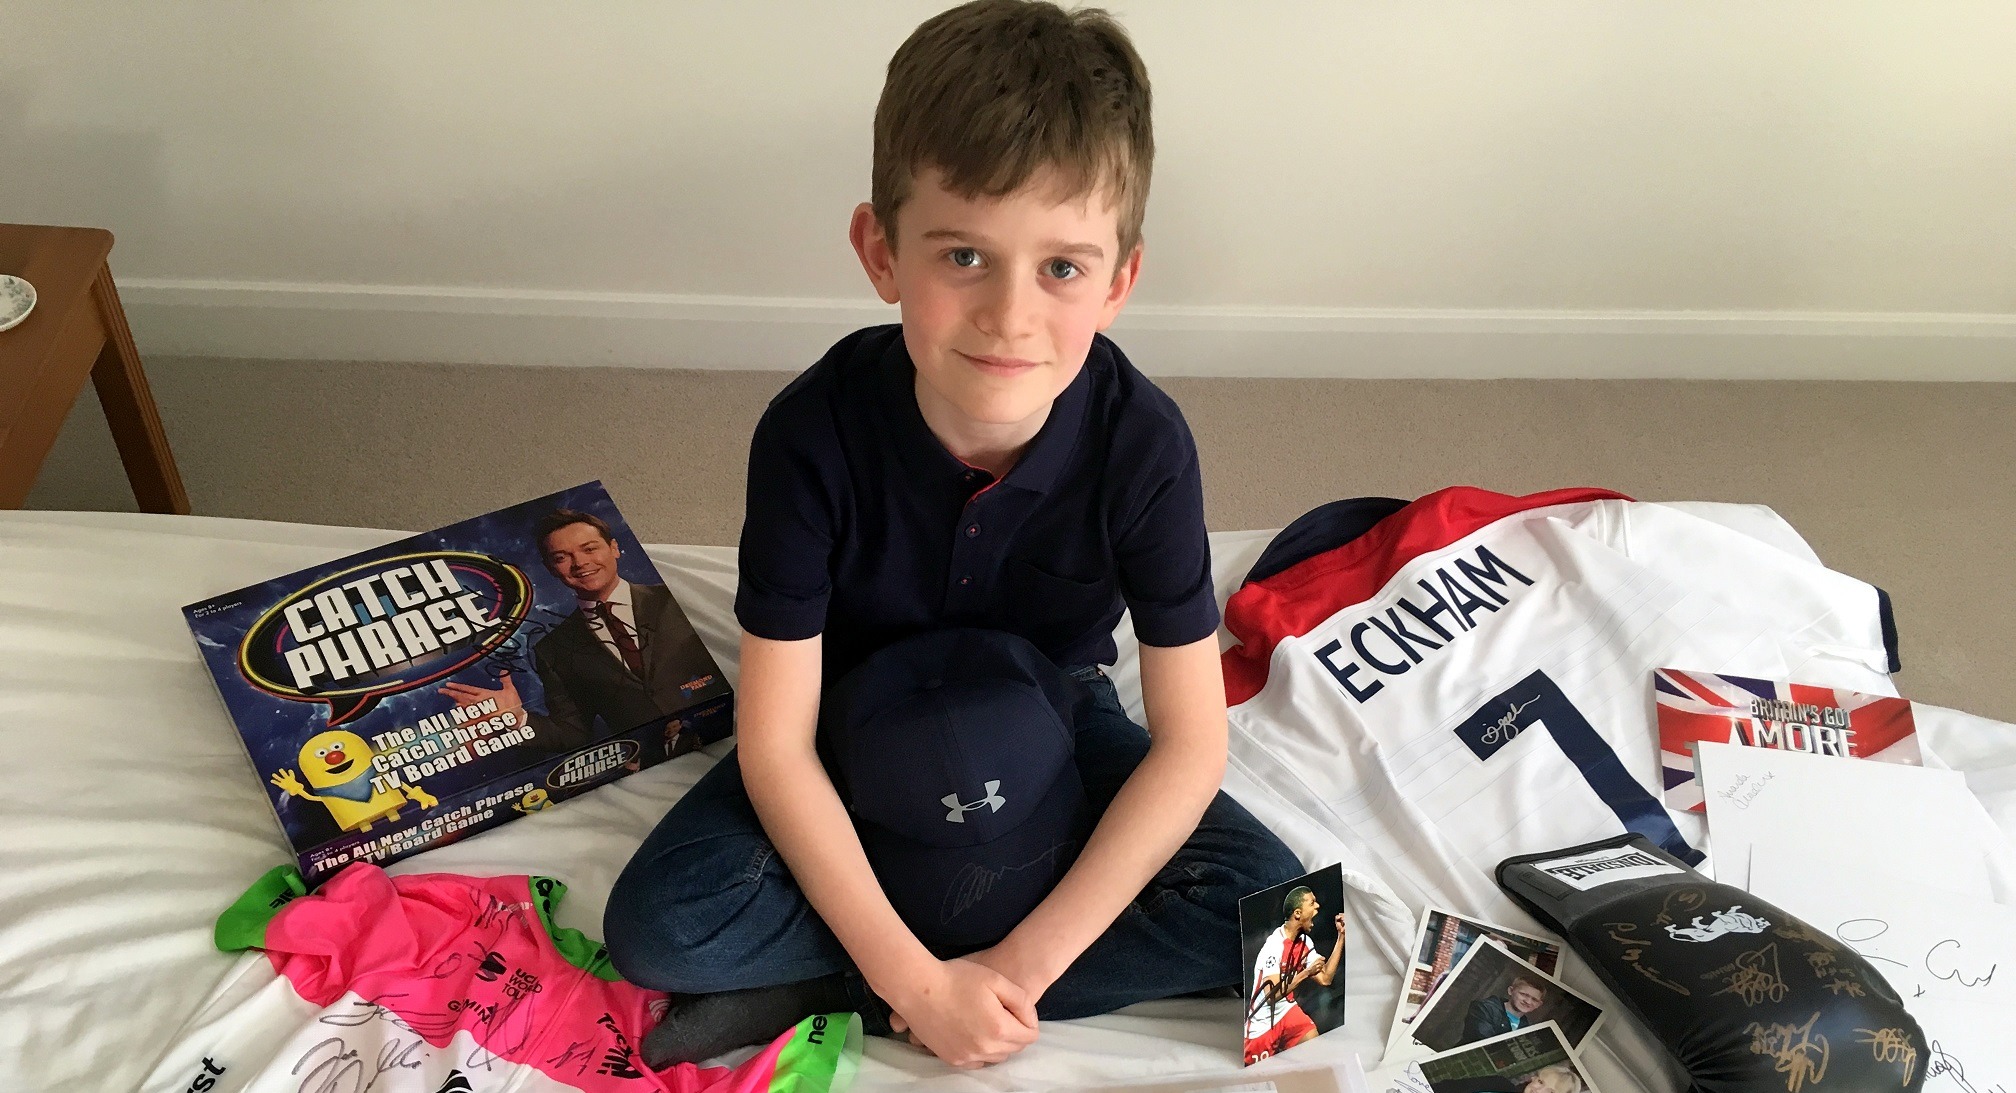 Thomas Sibley has collected a number of signed-memorabilia-to-auction off in aid of St Catherine’s Hospice which cared for his beloved dad 3